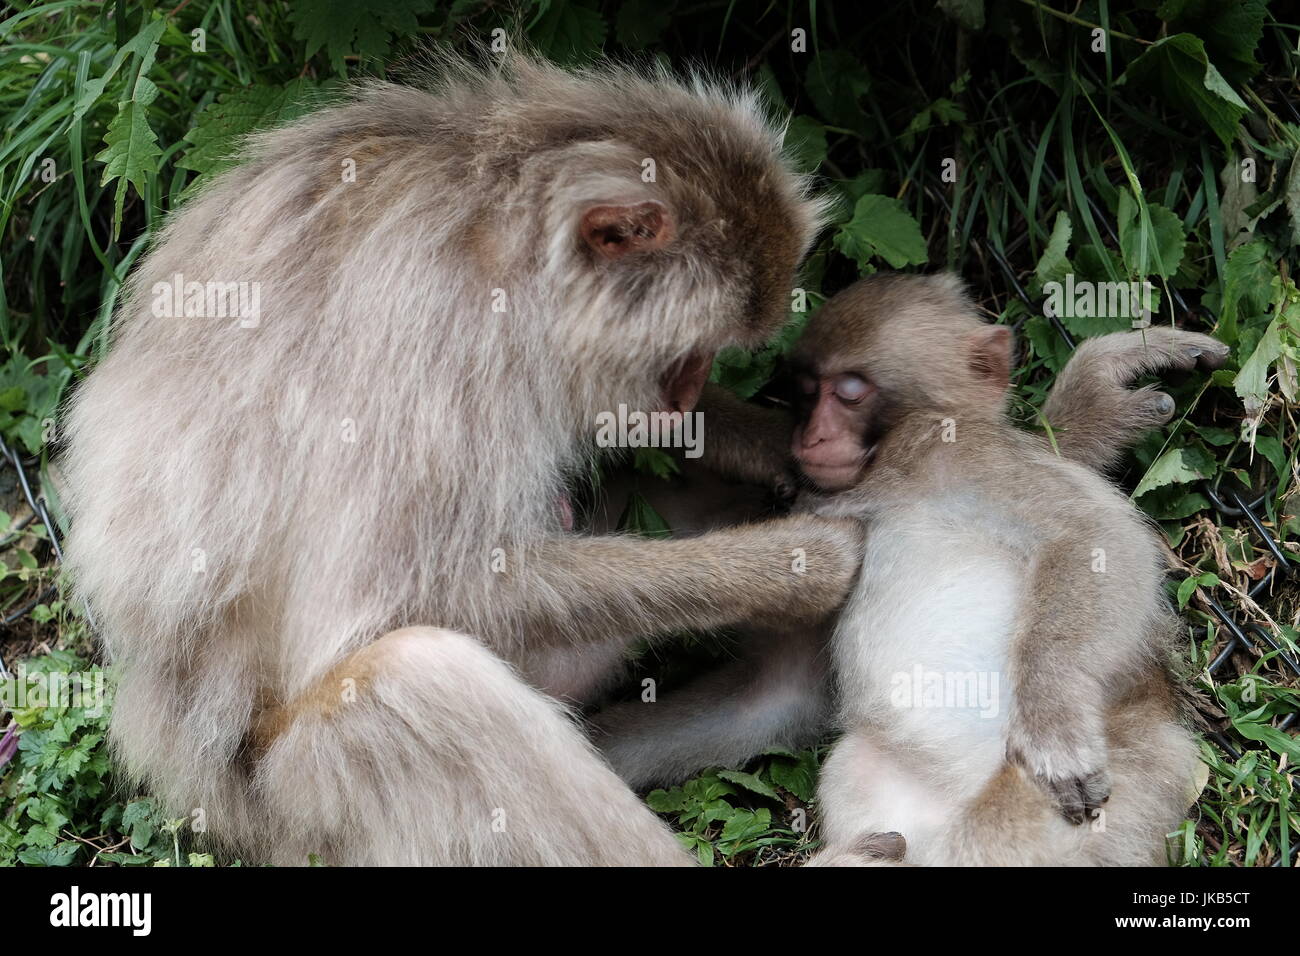 Mother snow monkey grooming her child Stock Photo